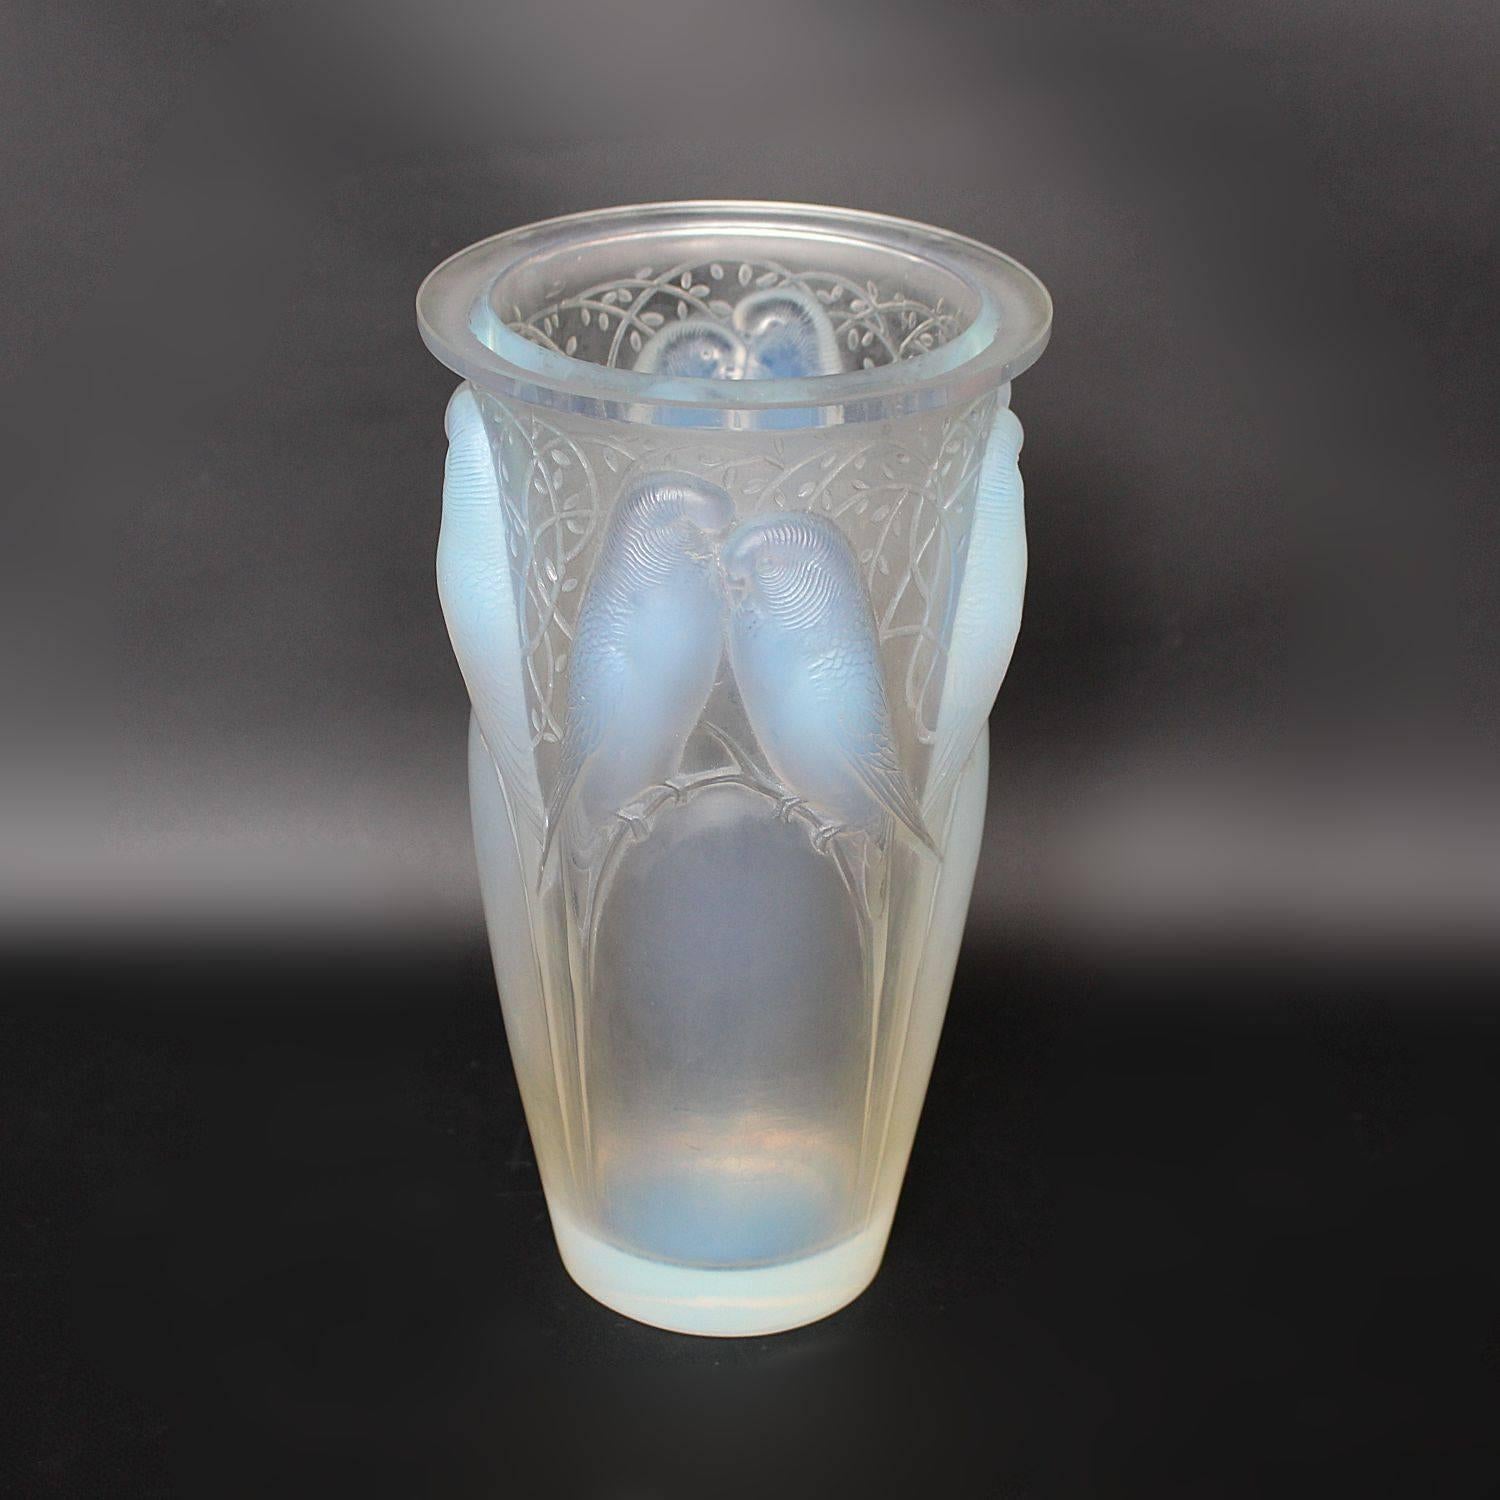 Ceylan, an Art Deco glass vase. A frosted and opalescent glass vase, relief decorated with pairs of lovebirds and vines.

Etched R Lalique France to underside.

Marcilhac, R Lalique Catalogue Raisonné de L’Œuvre de Verre p.418, model number